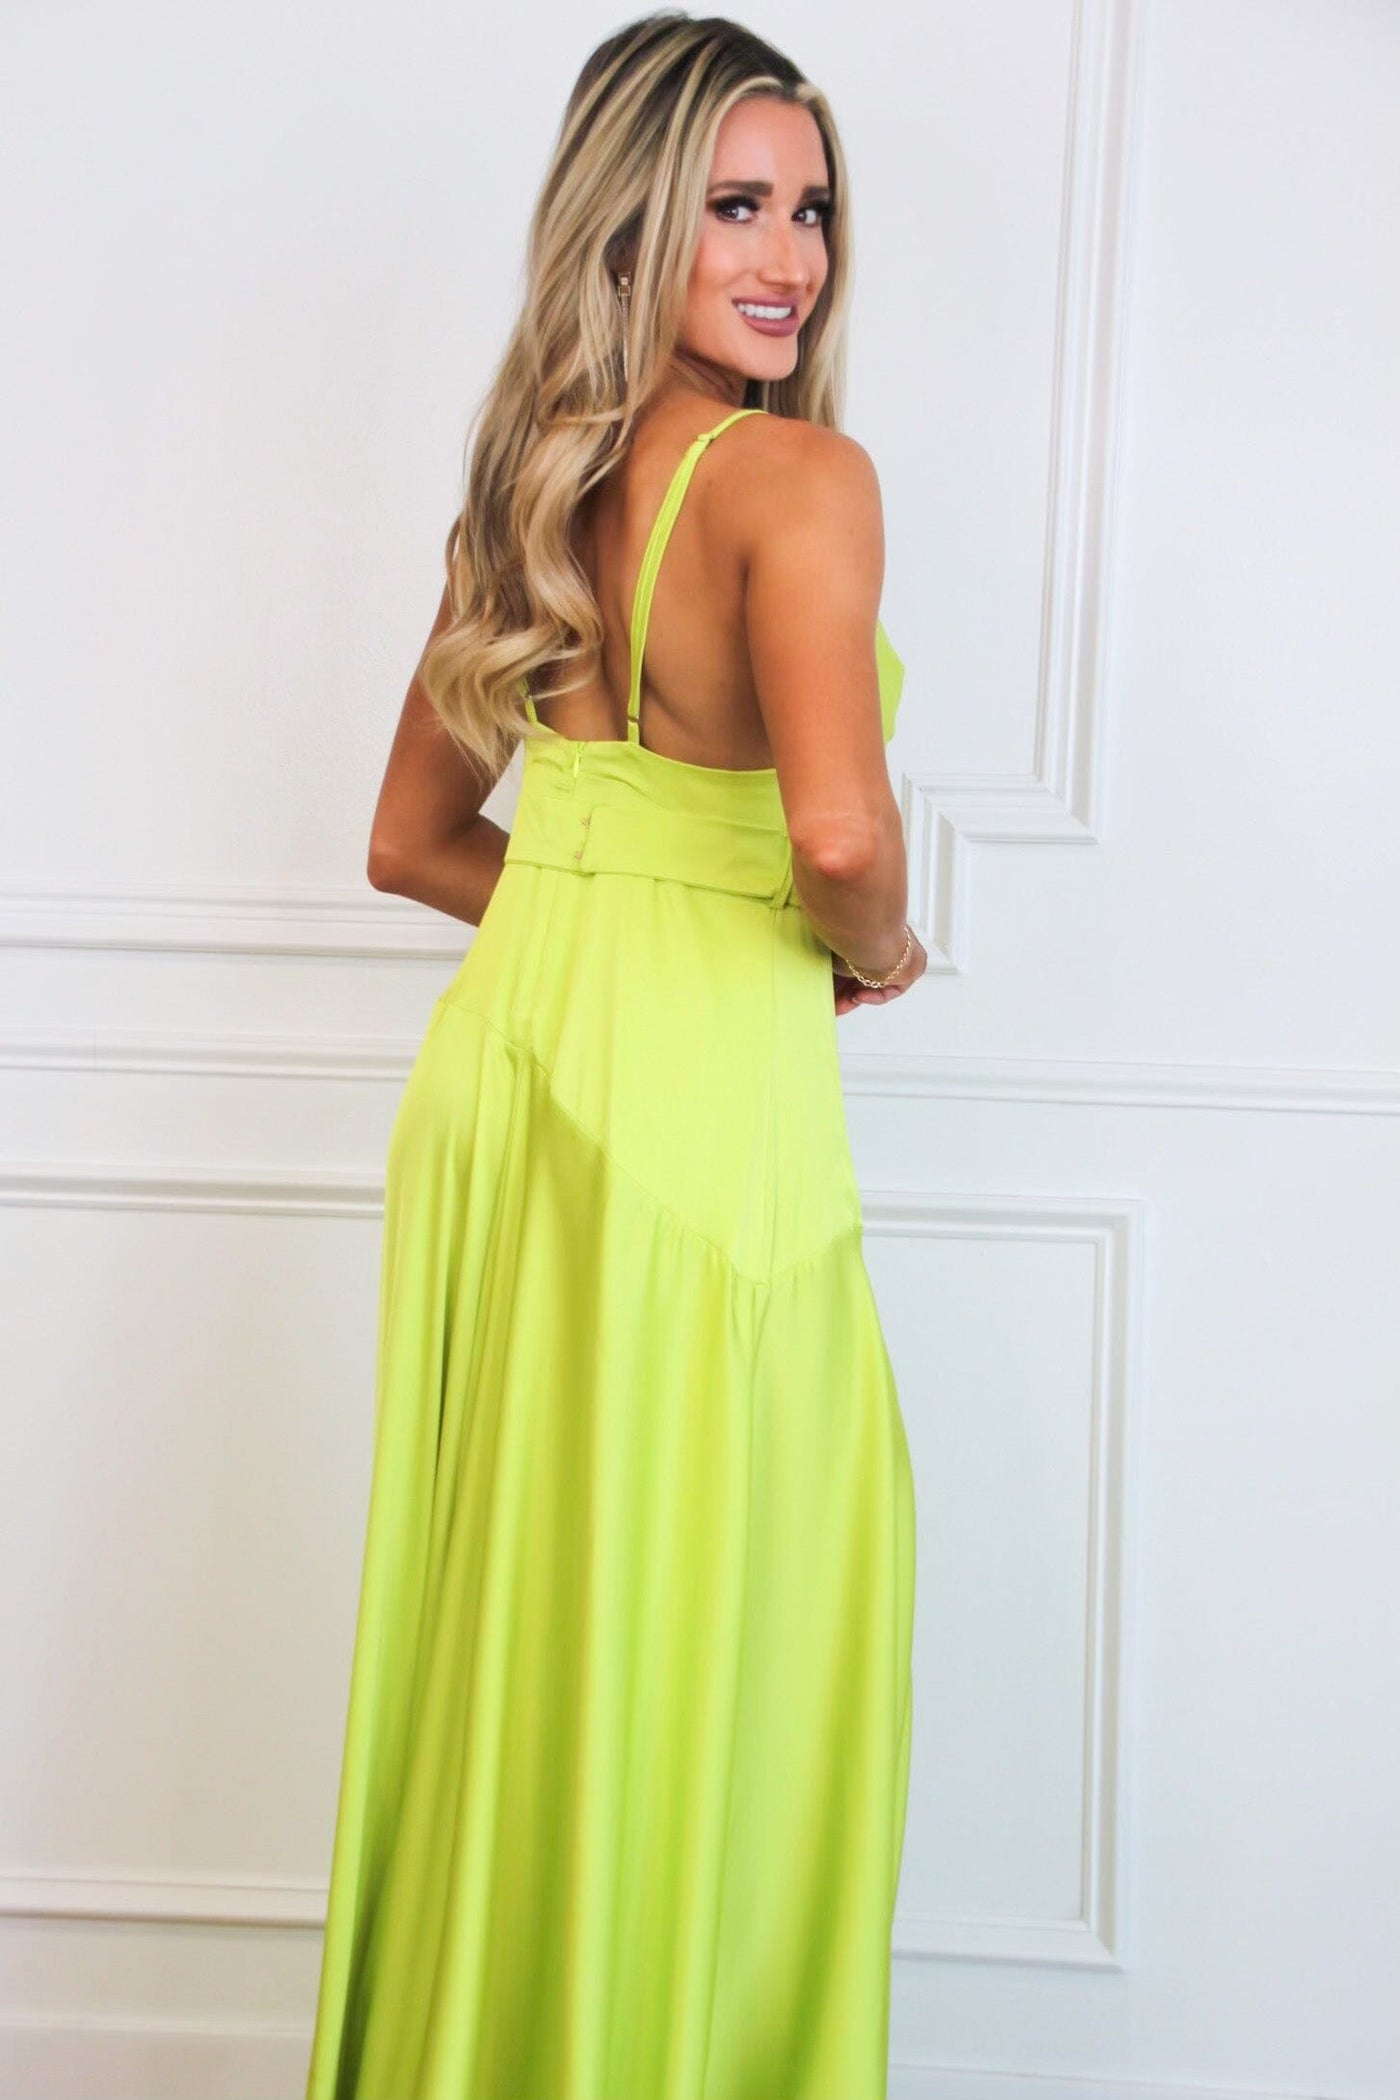 Milani Cowl Neck Satin Maxi Dress: Lime - Bella and Bloom Boutique